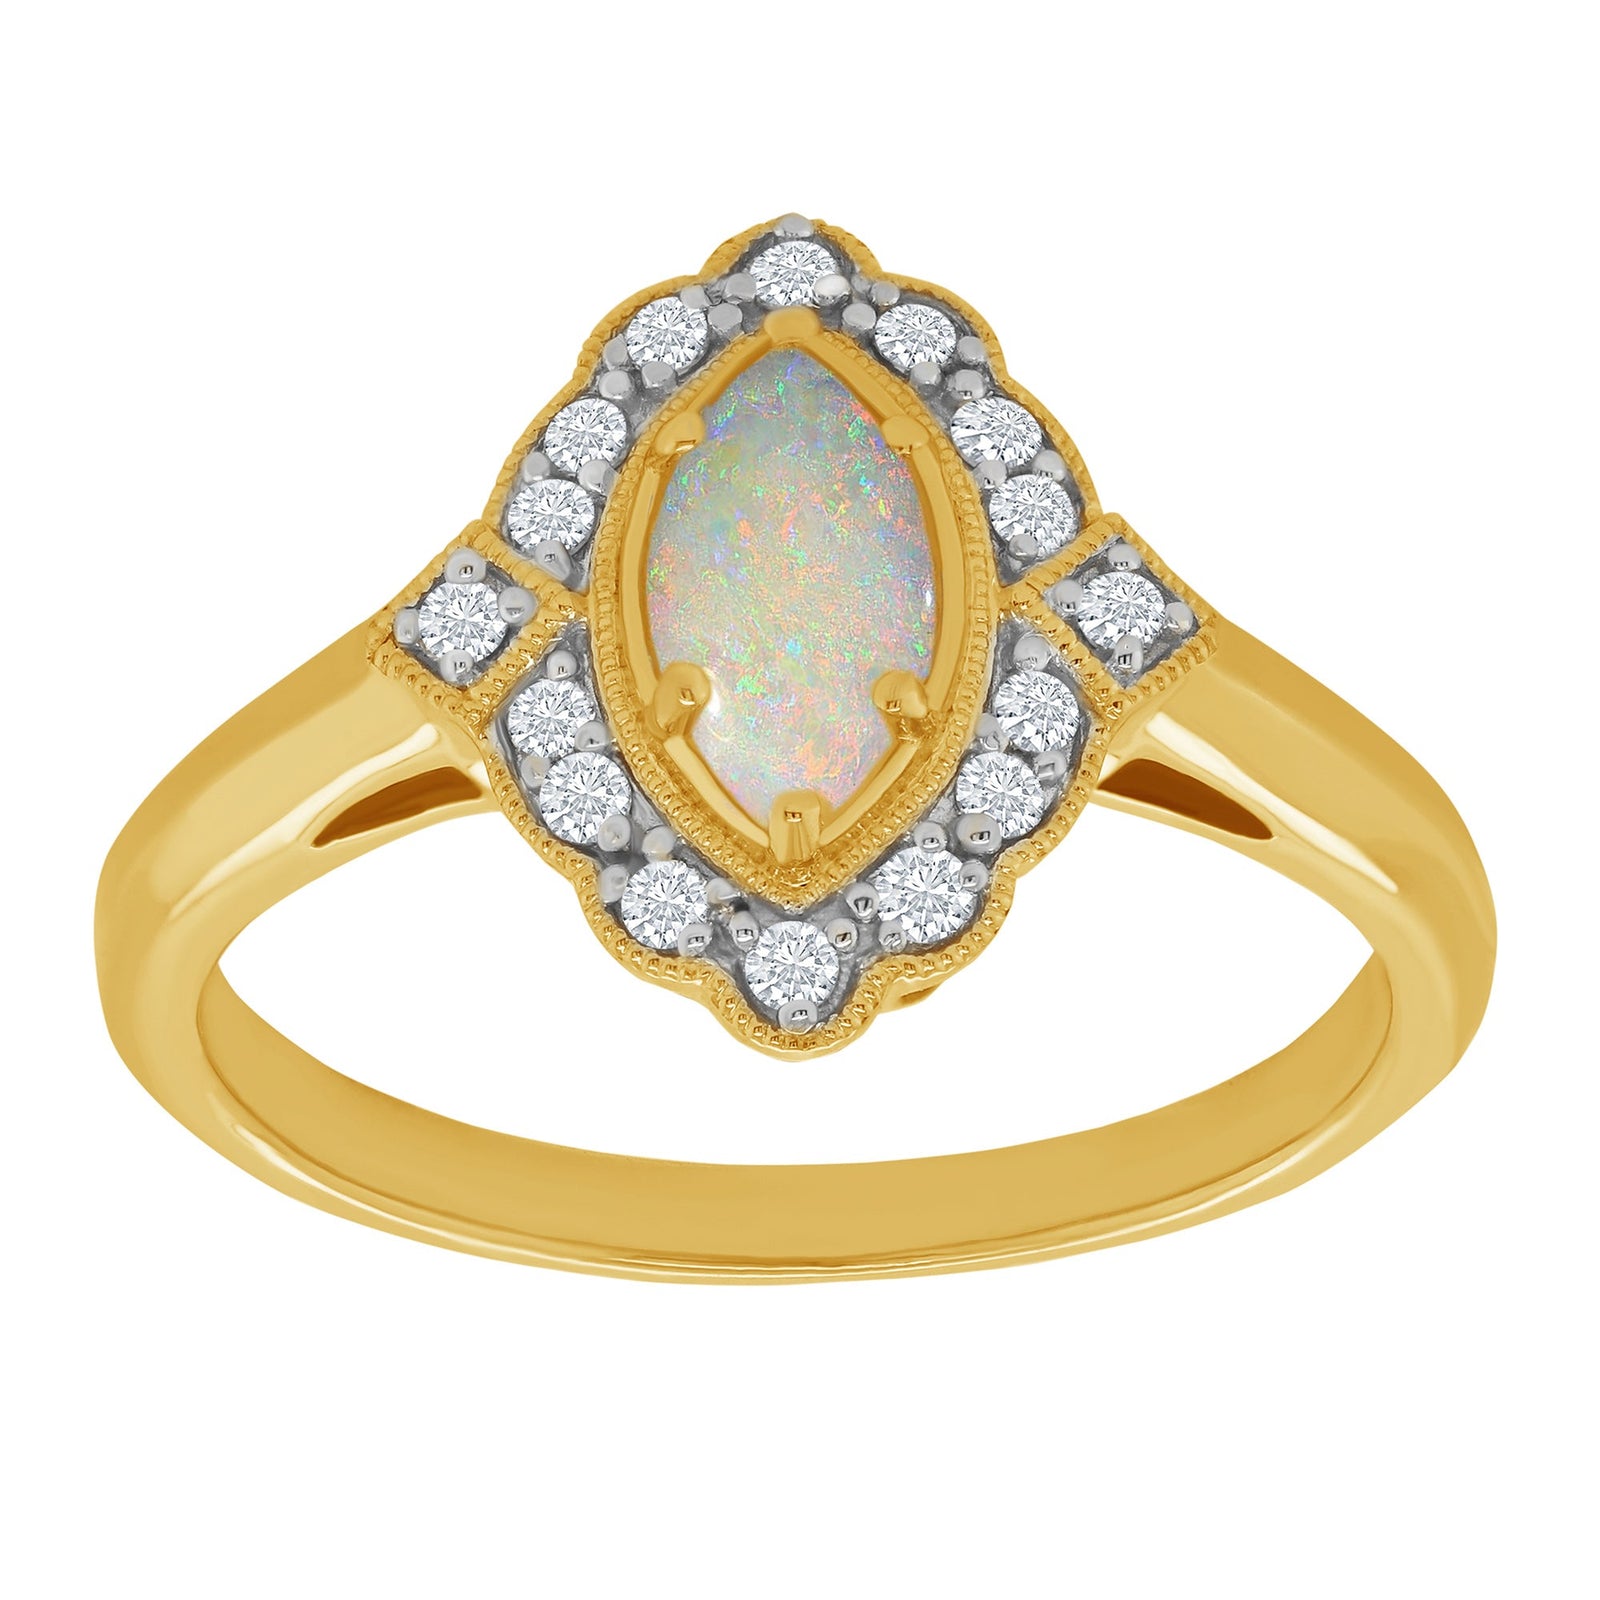 9ct gold 8x4mm marquise shape opal & diamond cluster ring 0.15ct